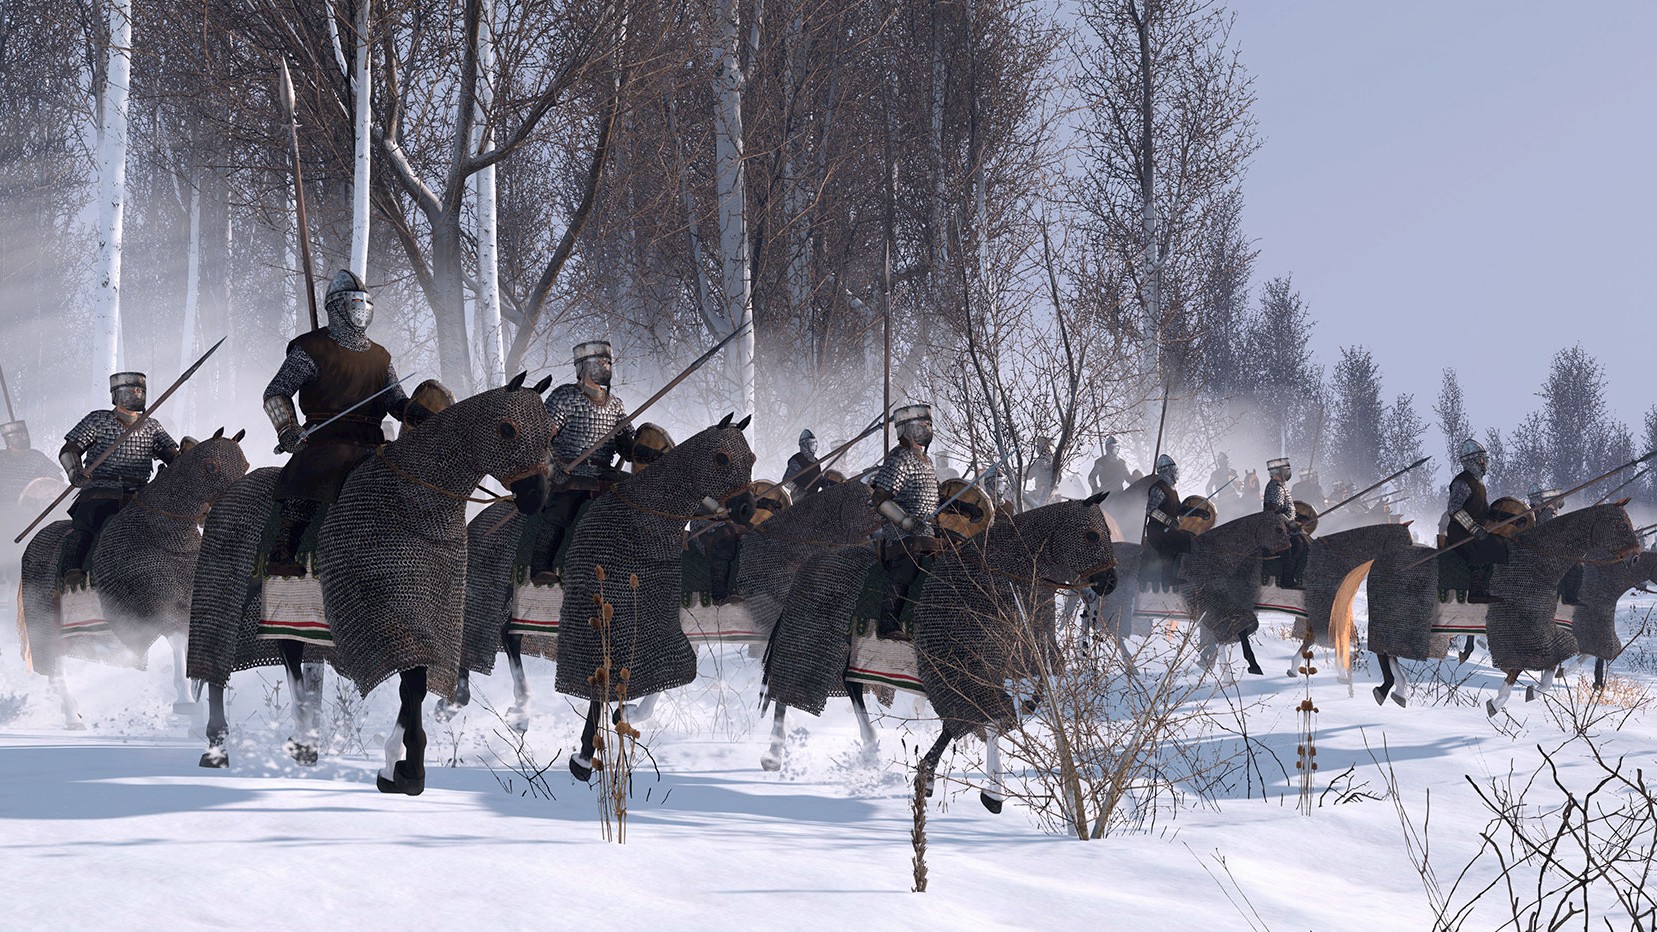  Mount and Blade 2 shows off official mod tools in a new dev update, and they look awesome 